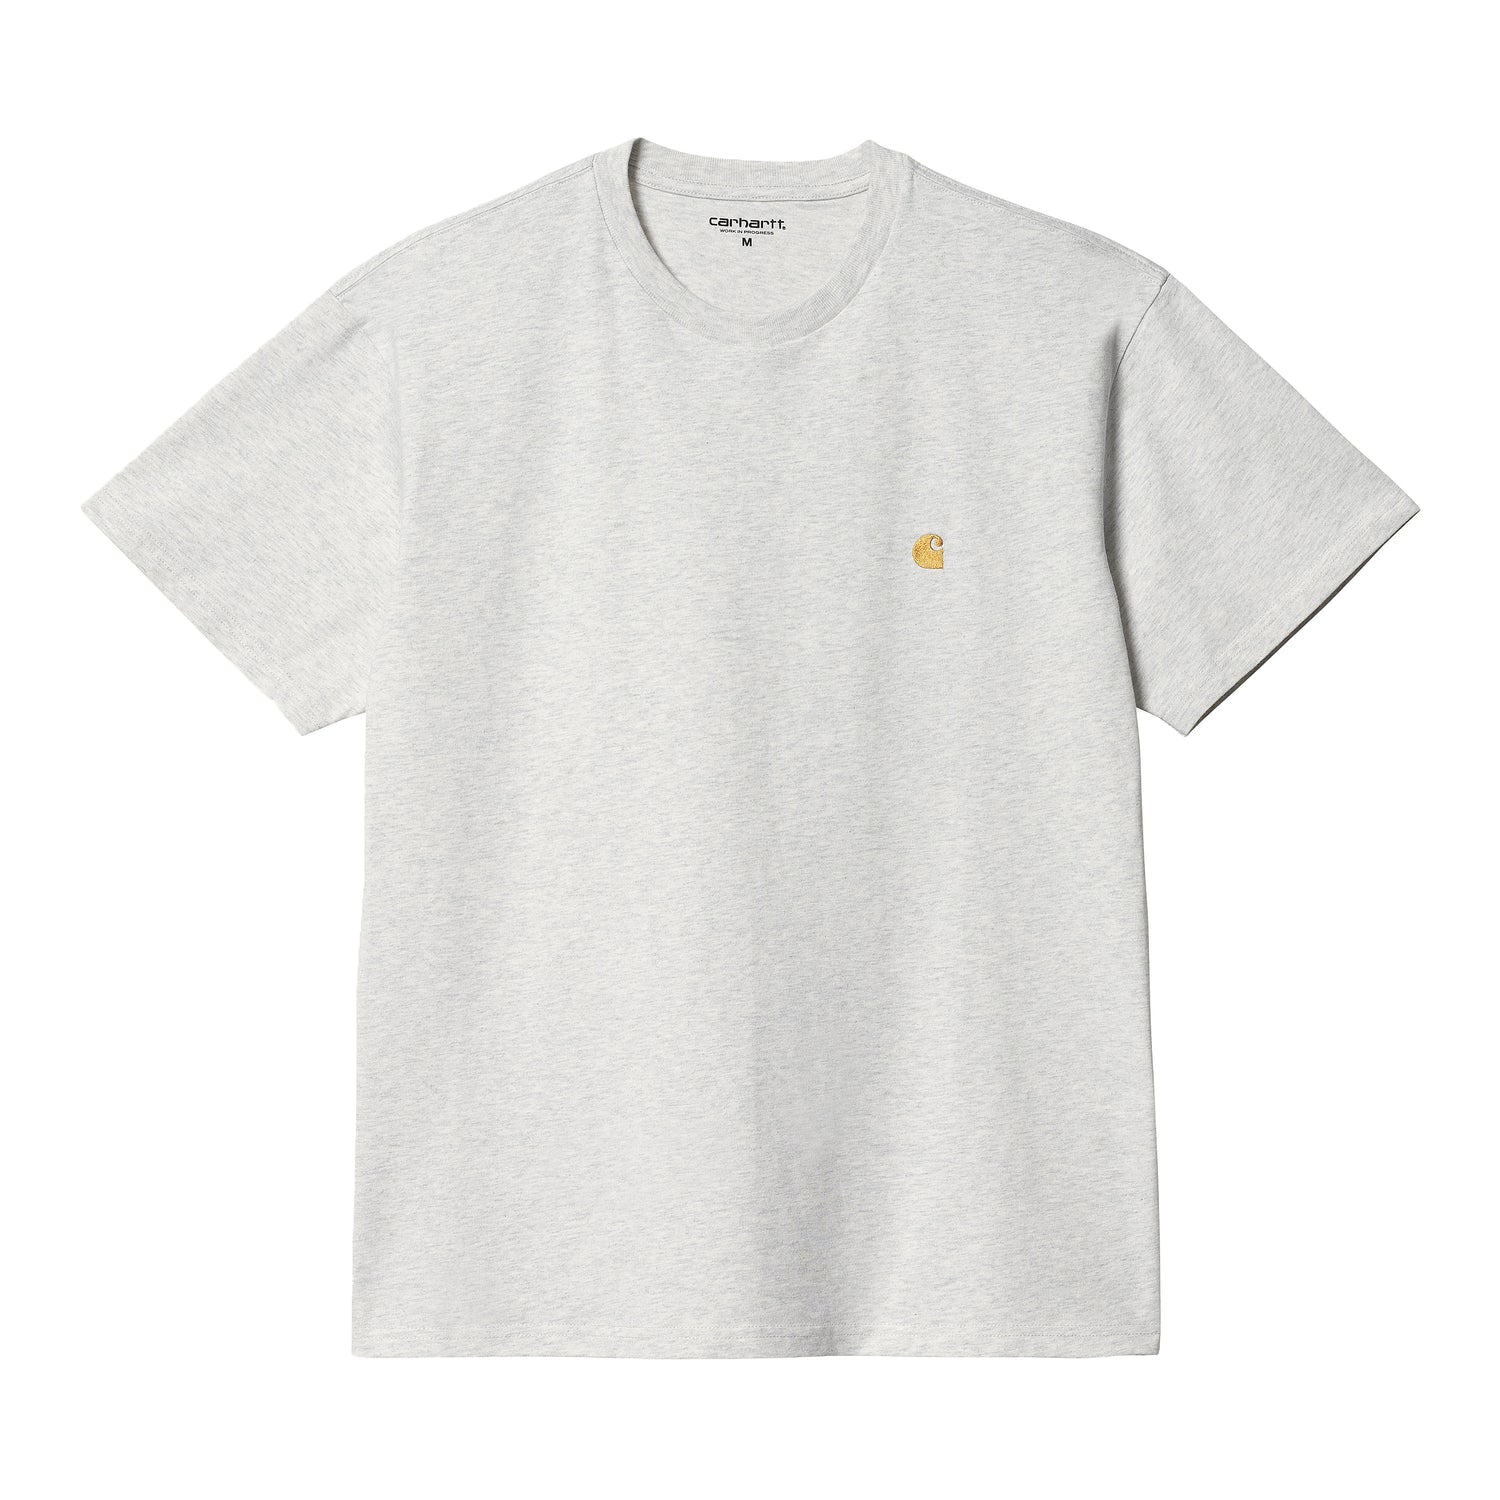 S/S CHASE T-SHIRT ASH HEATHER / GOLD